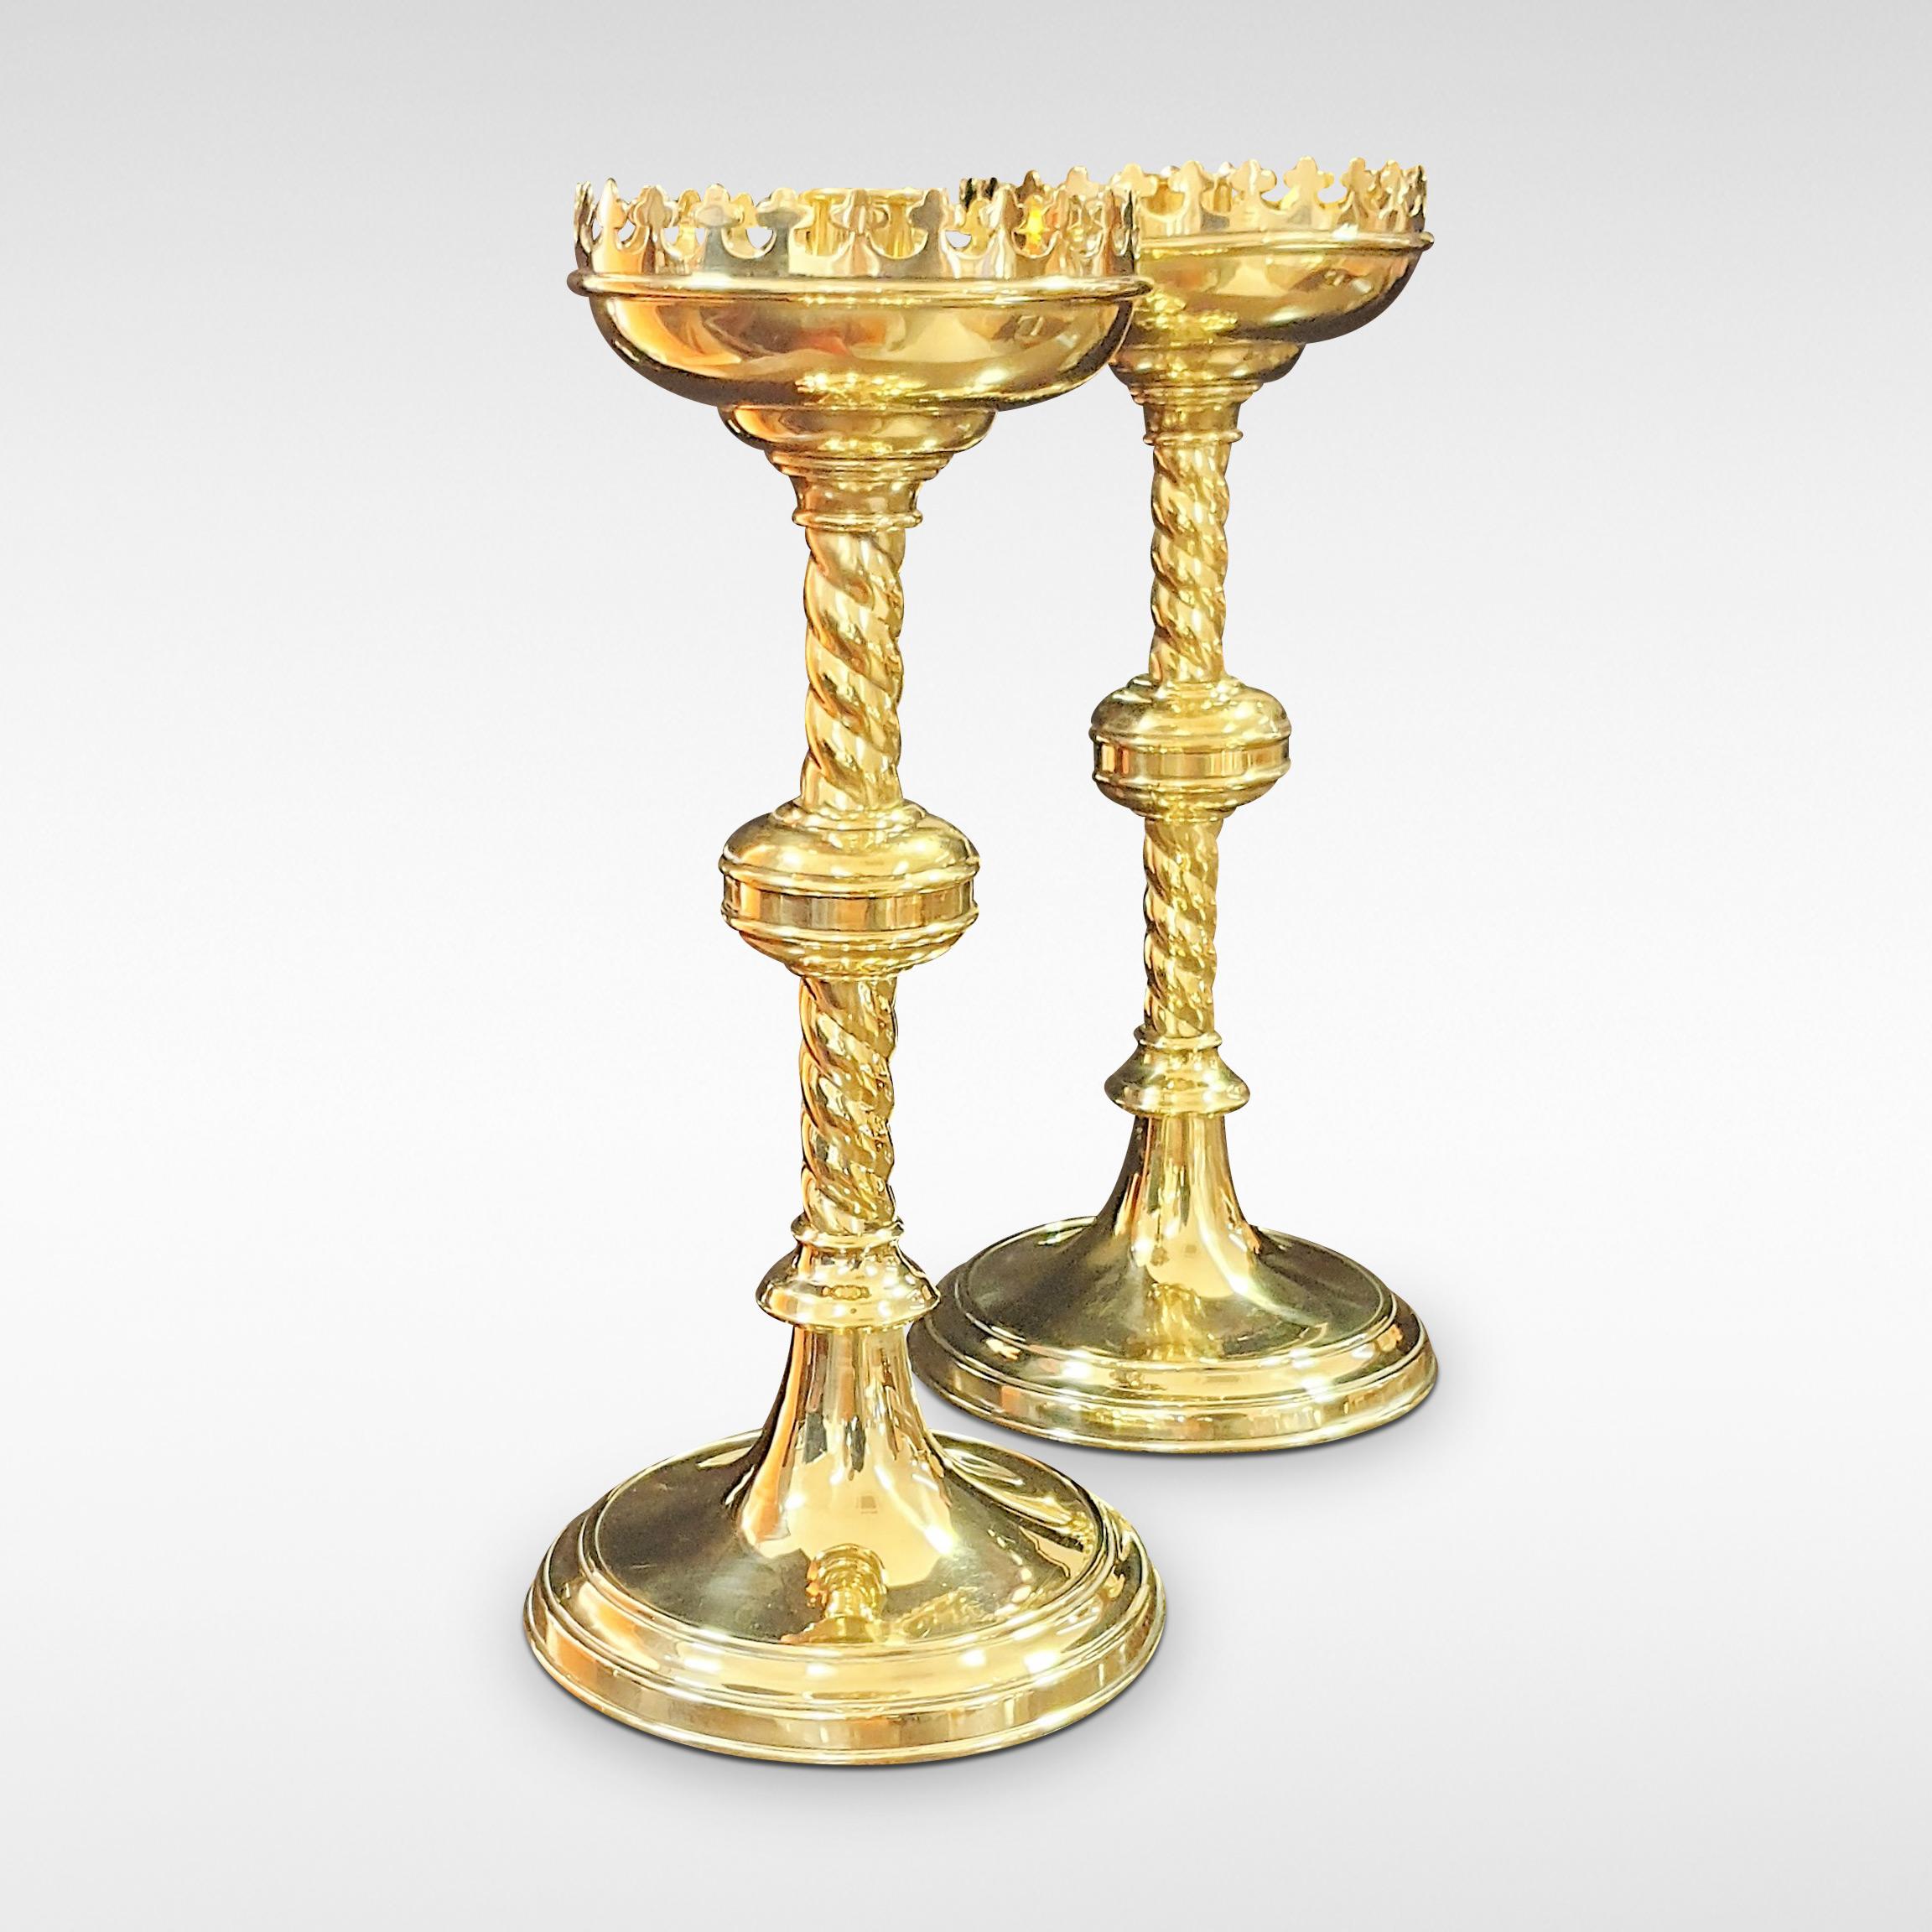 Pair of brass candlesticks, castellated sconces, late 19th century.